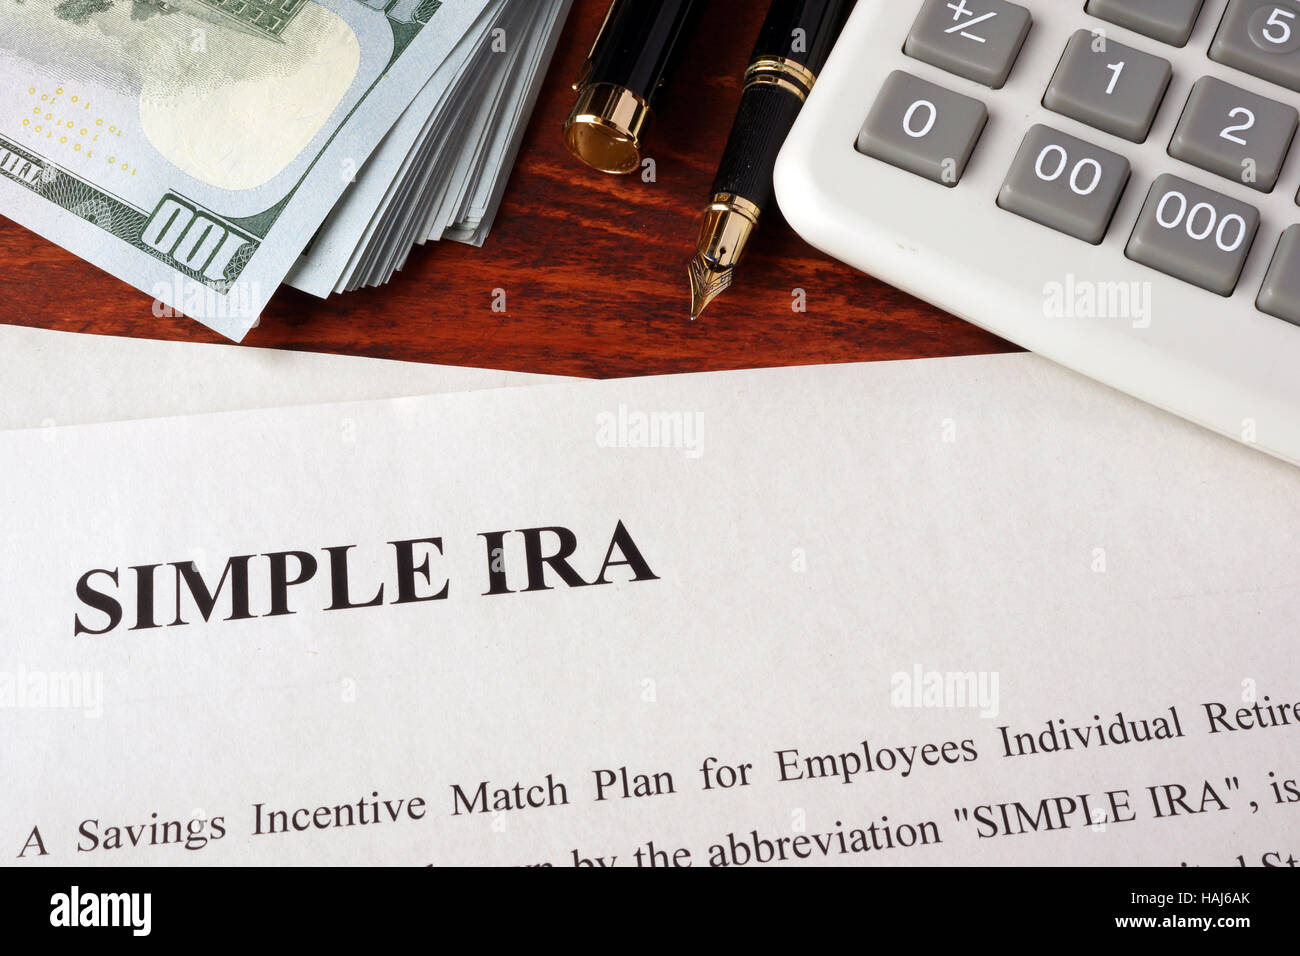 Papers with simple ira and book on a table. Stock Photo